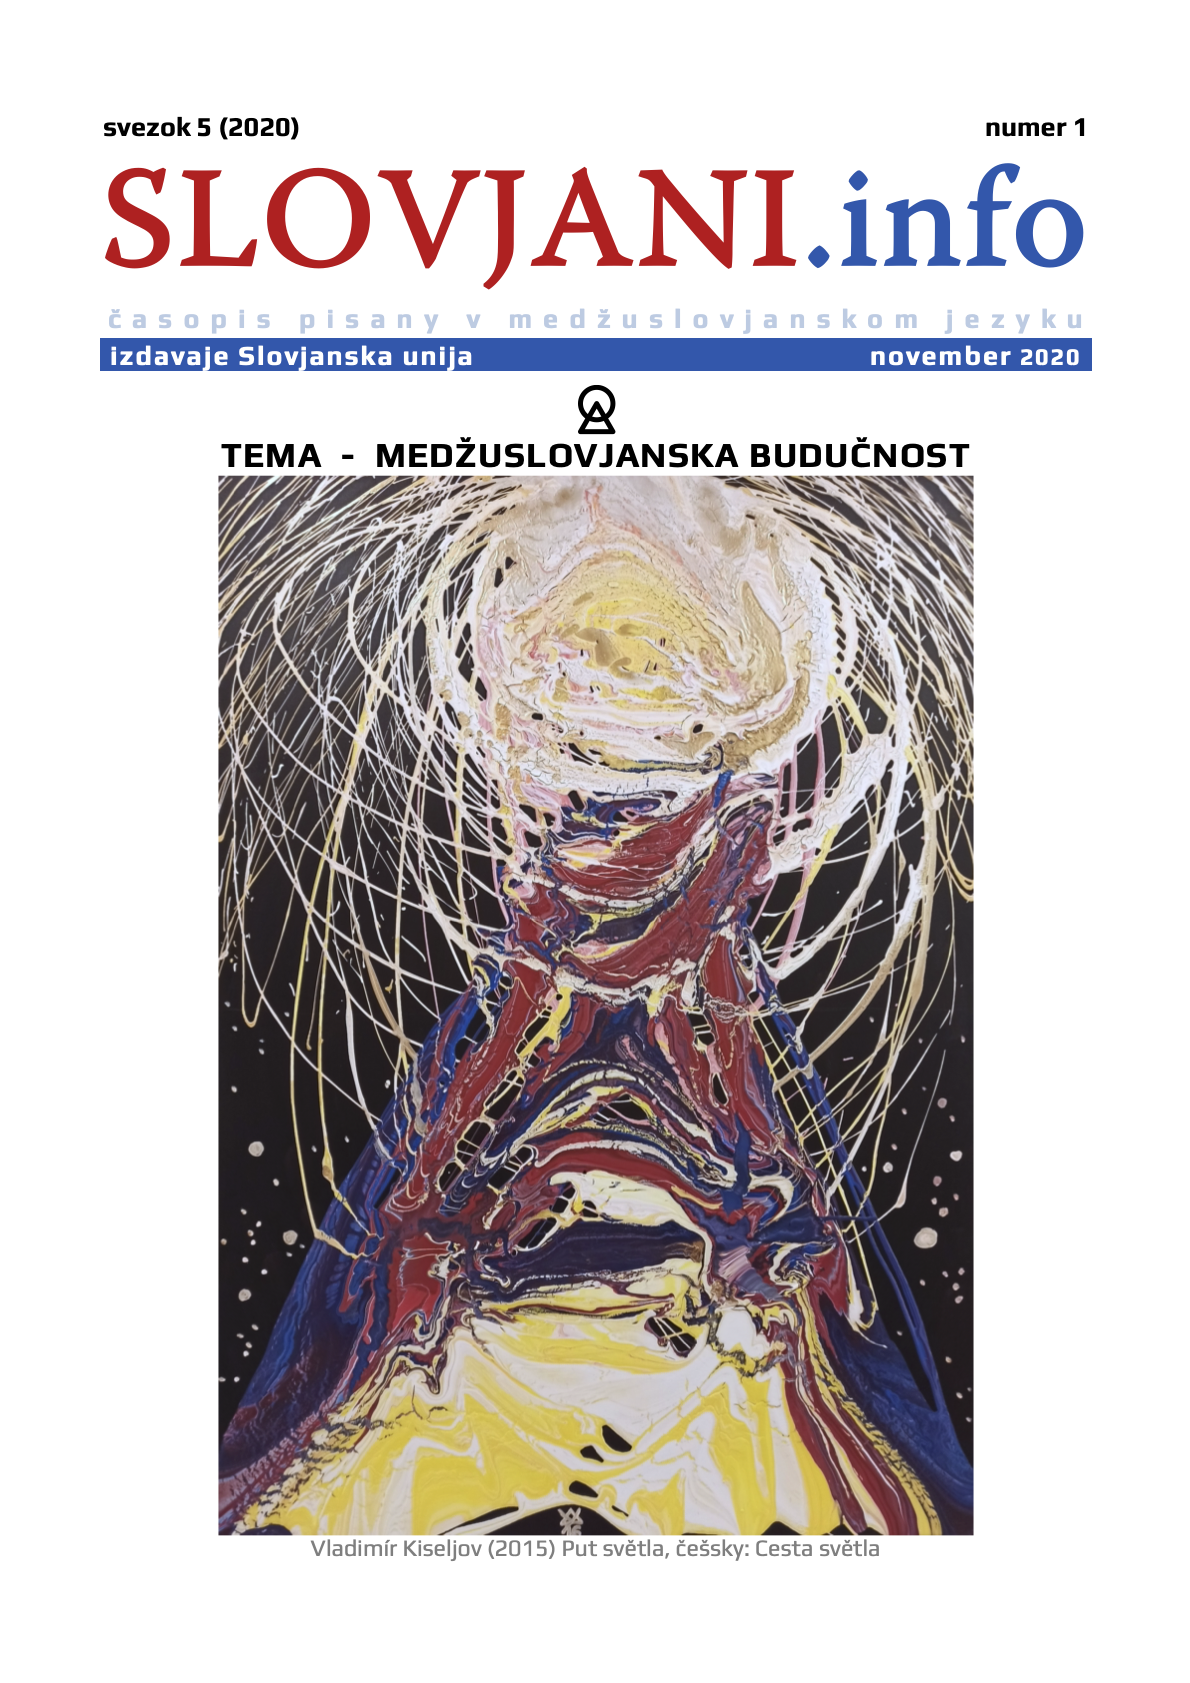 Vladimir Kiseljov - author of the graphics on the cover Cover Image